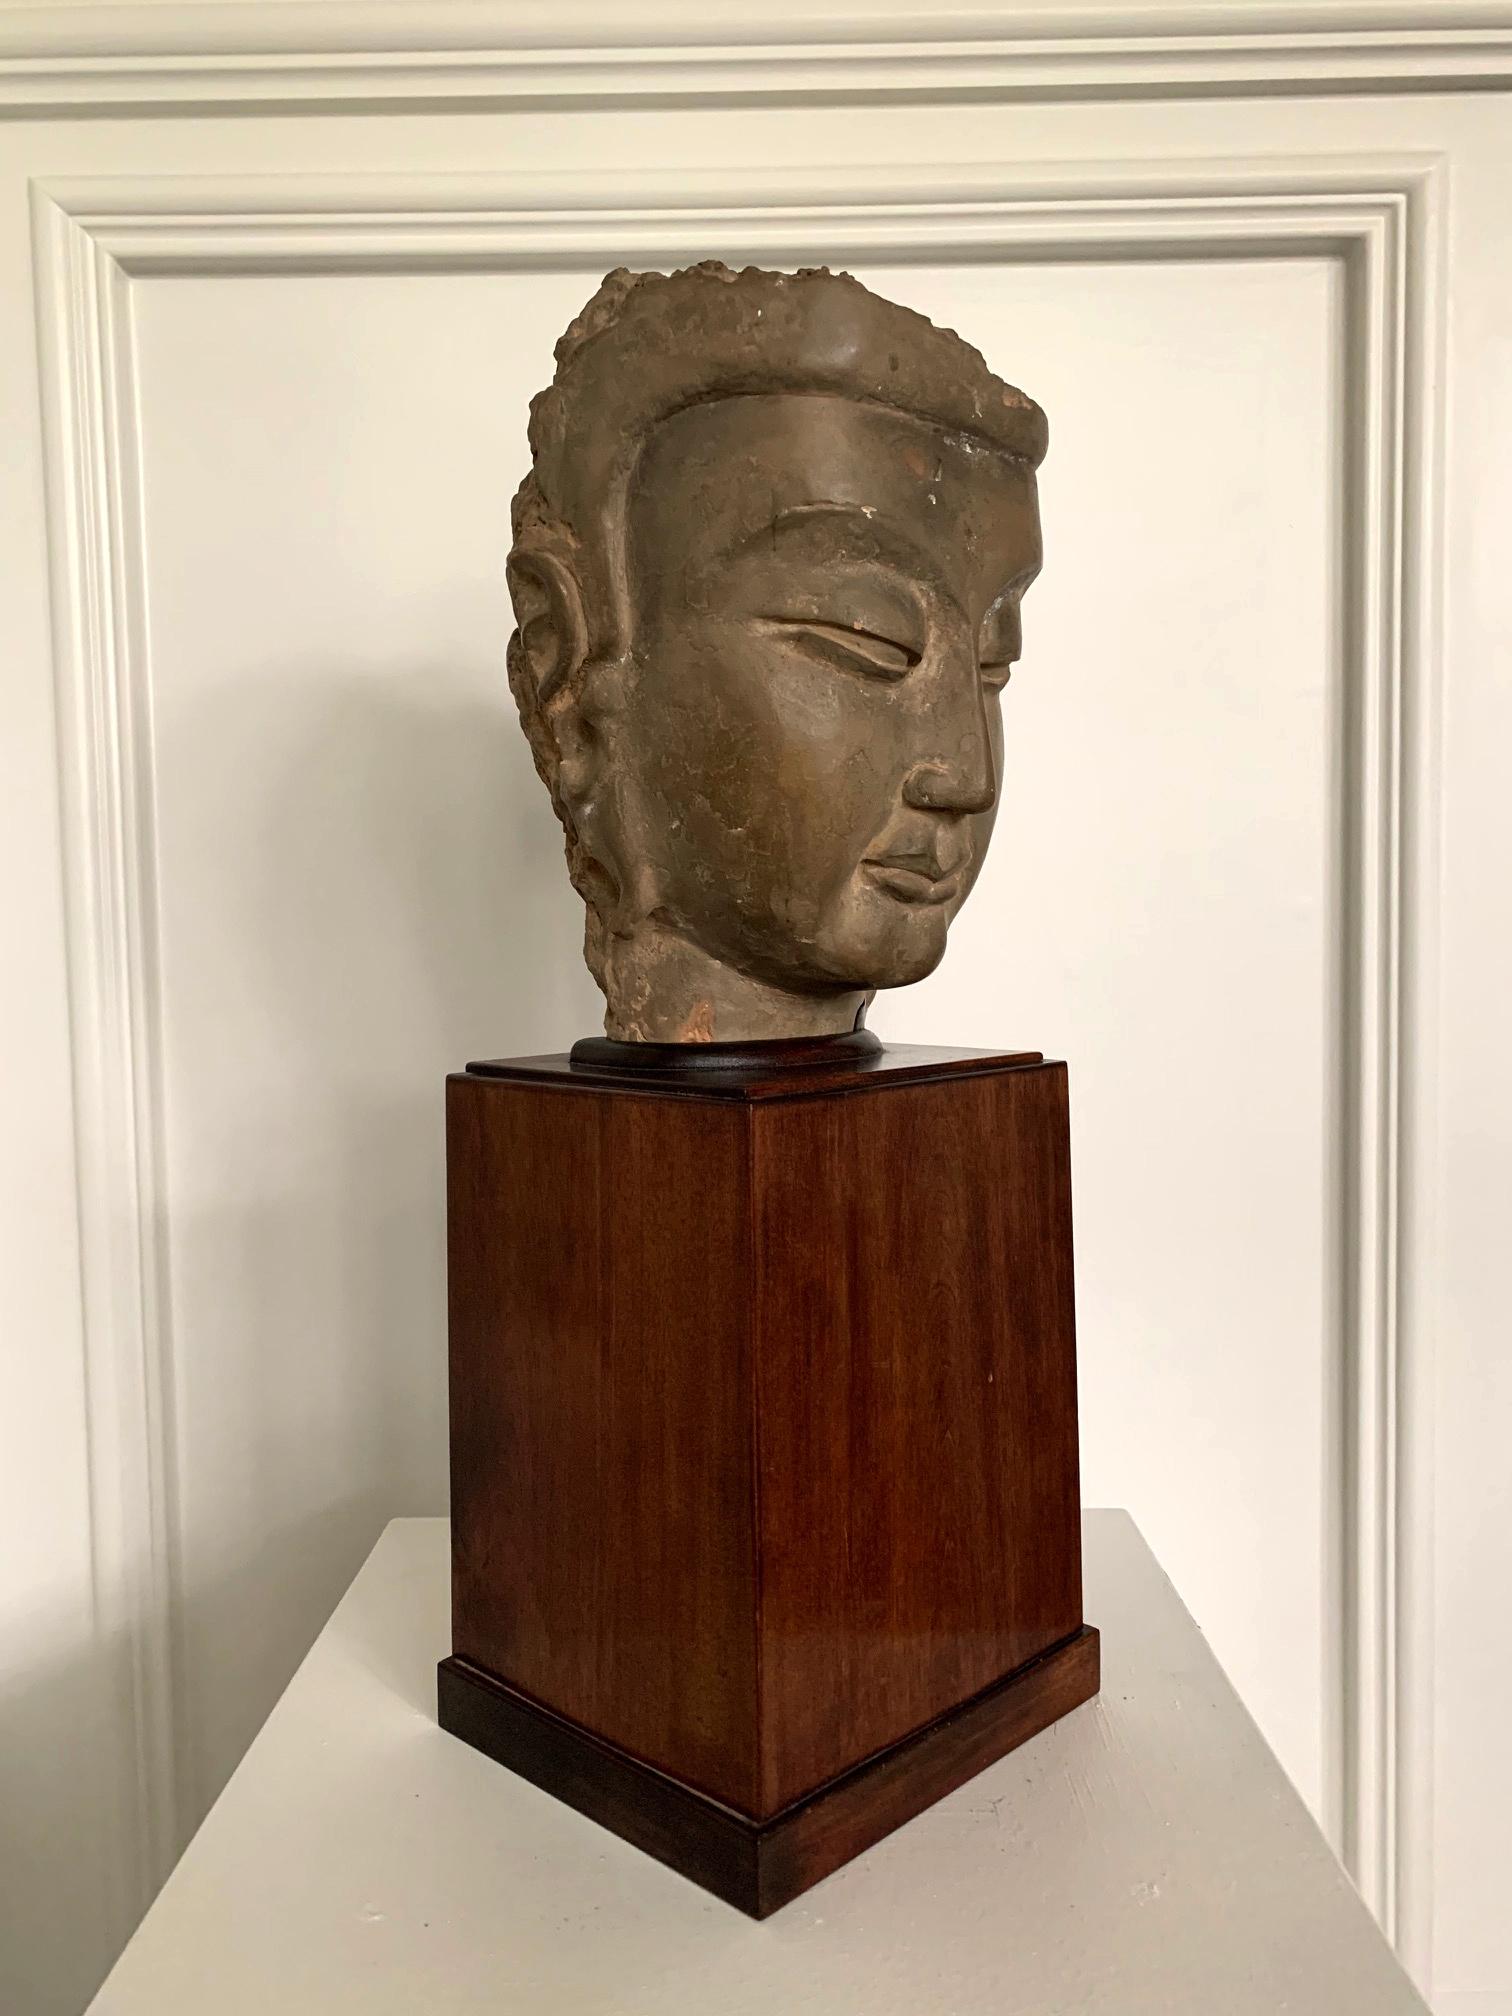 On offer is a fine Bodhisattva head made of stucco around a wood core circa 6th century AD. The fragment was part of high-relief wall sculpture based on its construction. The frontal and the side of the head have been largely preserved in excellent